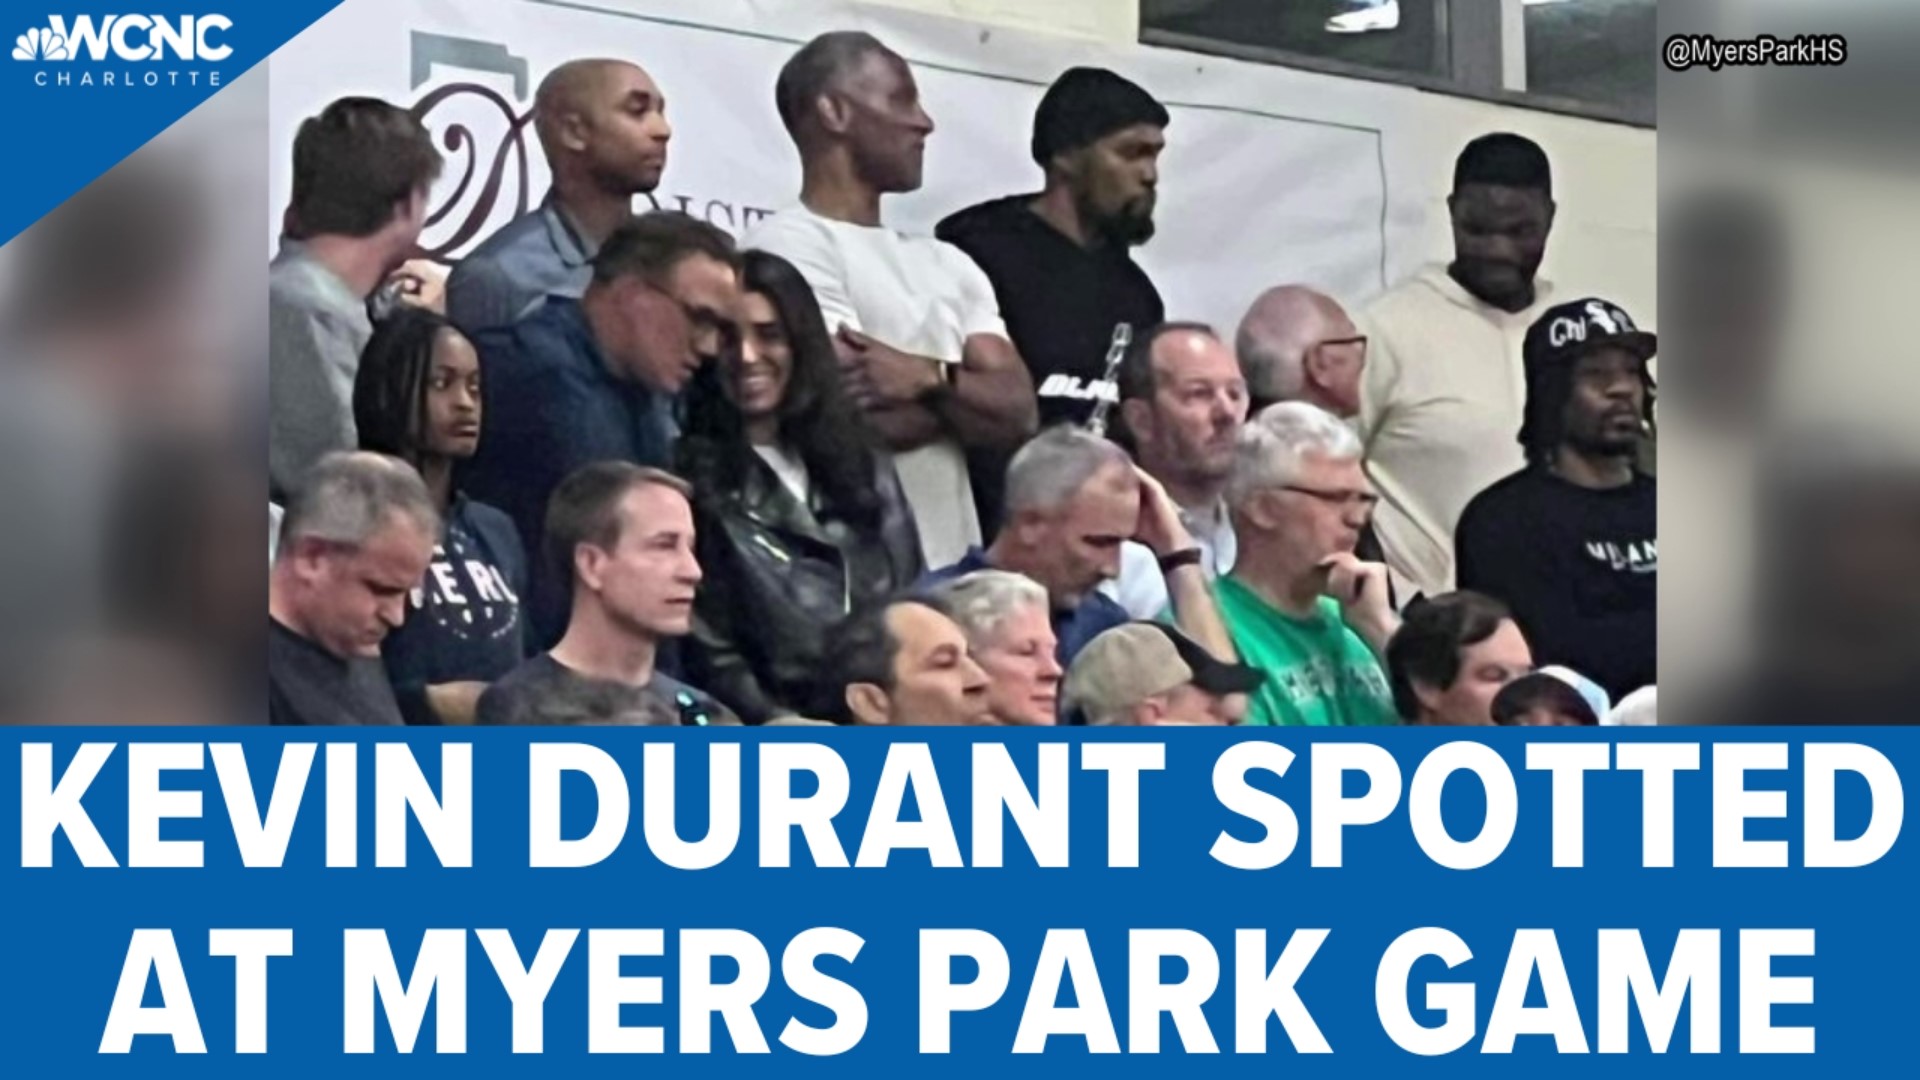 The Charlotte area has plenty of star high school basketball players, but the biggest star on Tuesday night at Myers Park was in the stands.